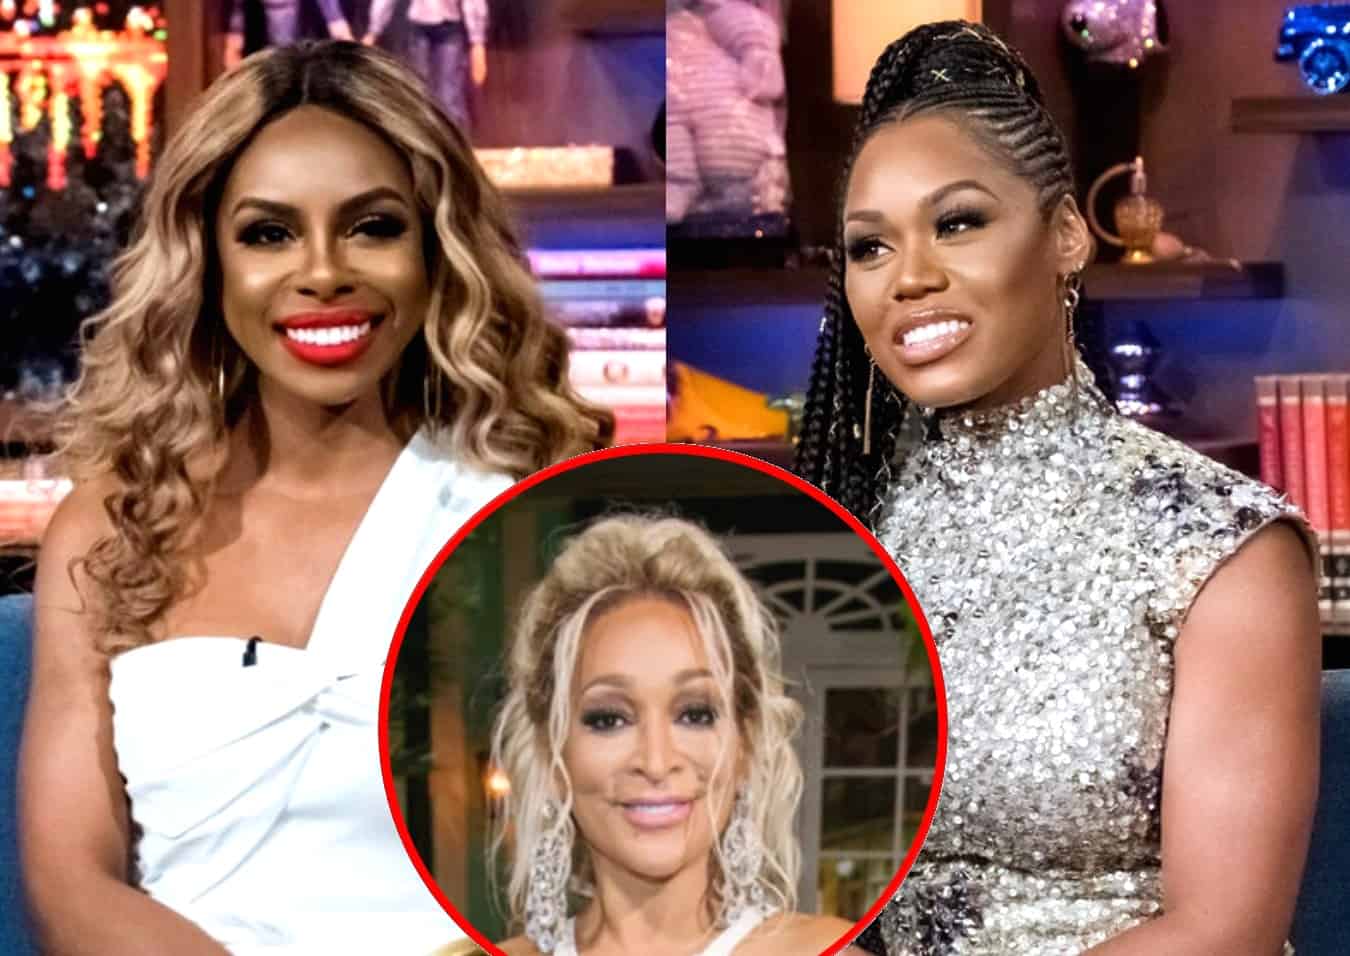 Candiace Dillard Repeats She'll "Never" Film With Monique Samuels Again After RHOP Reunion, Addresses Estrangement From Karen Huger and Slams Michael Darby